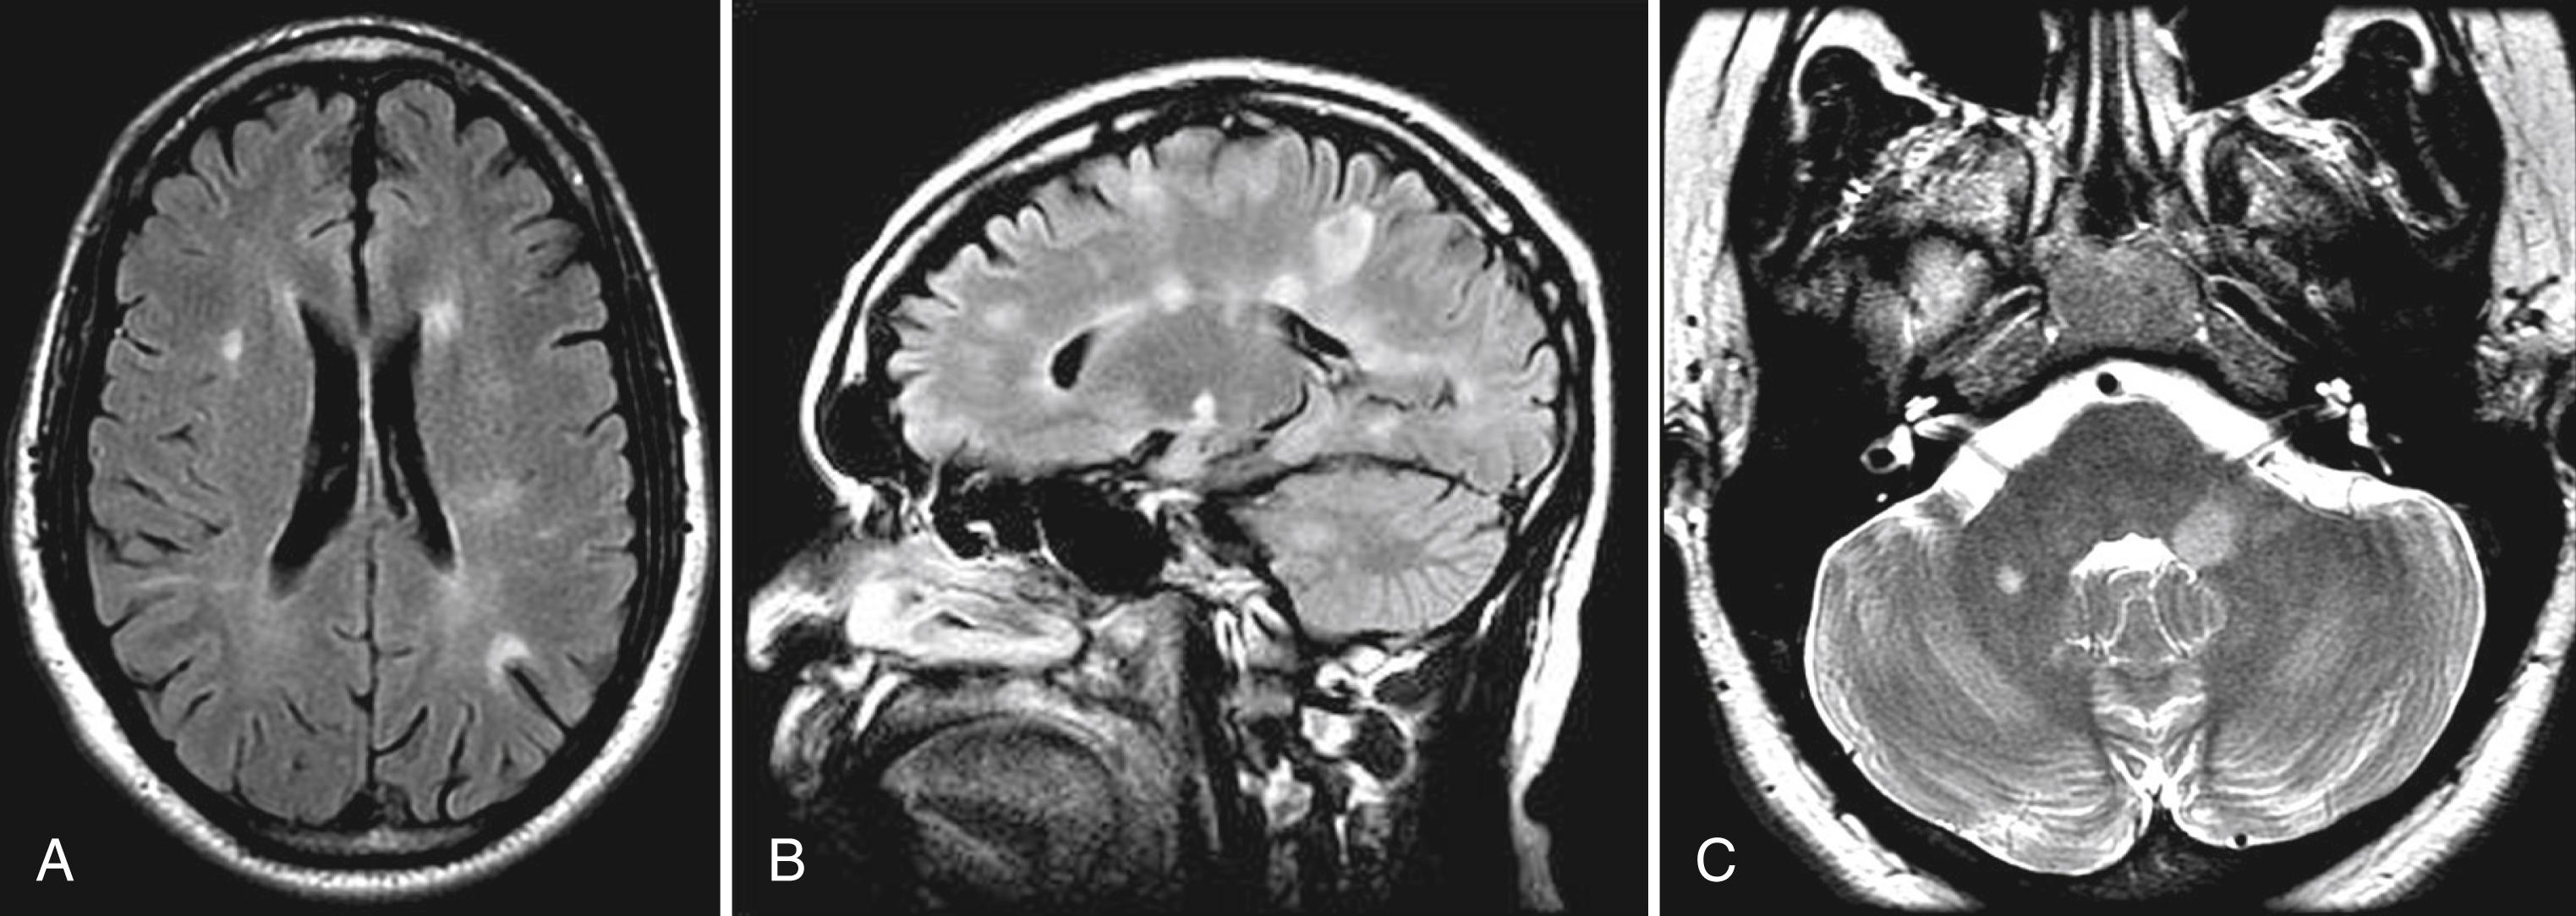 Fig. 80.8, Typical Magnetic Resonance Imaging Appearance of Multiple Sclerosis Lesions in Brain.